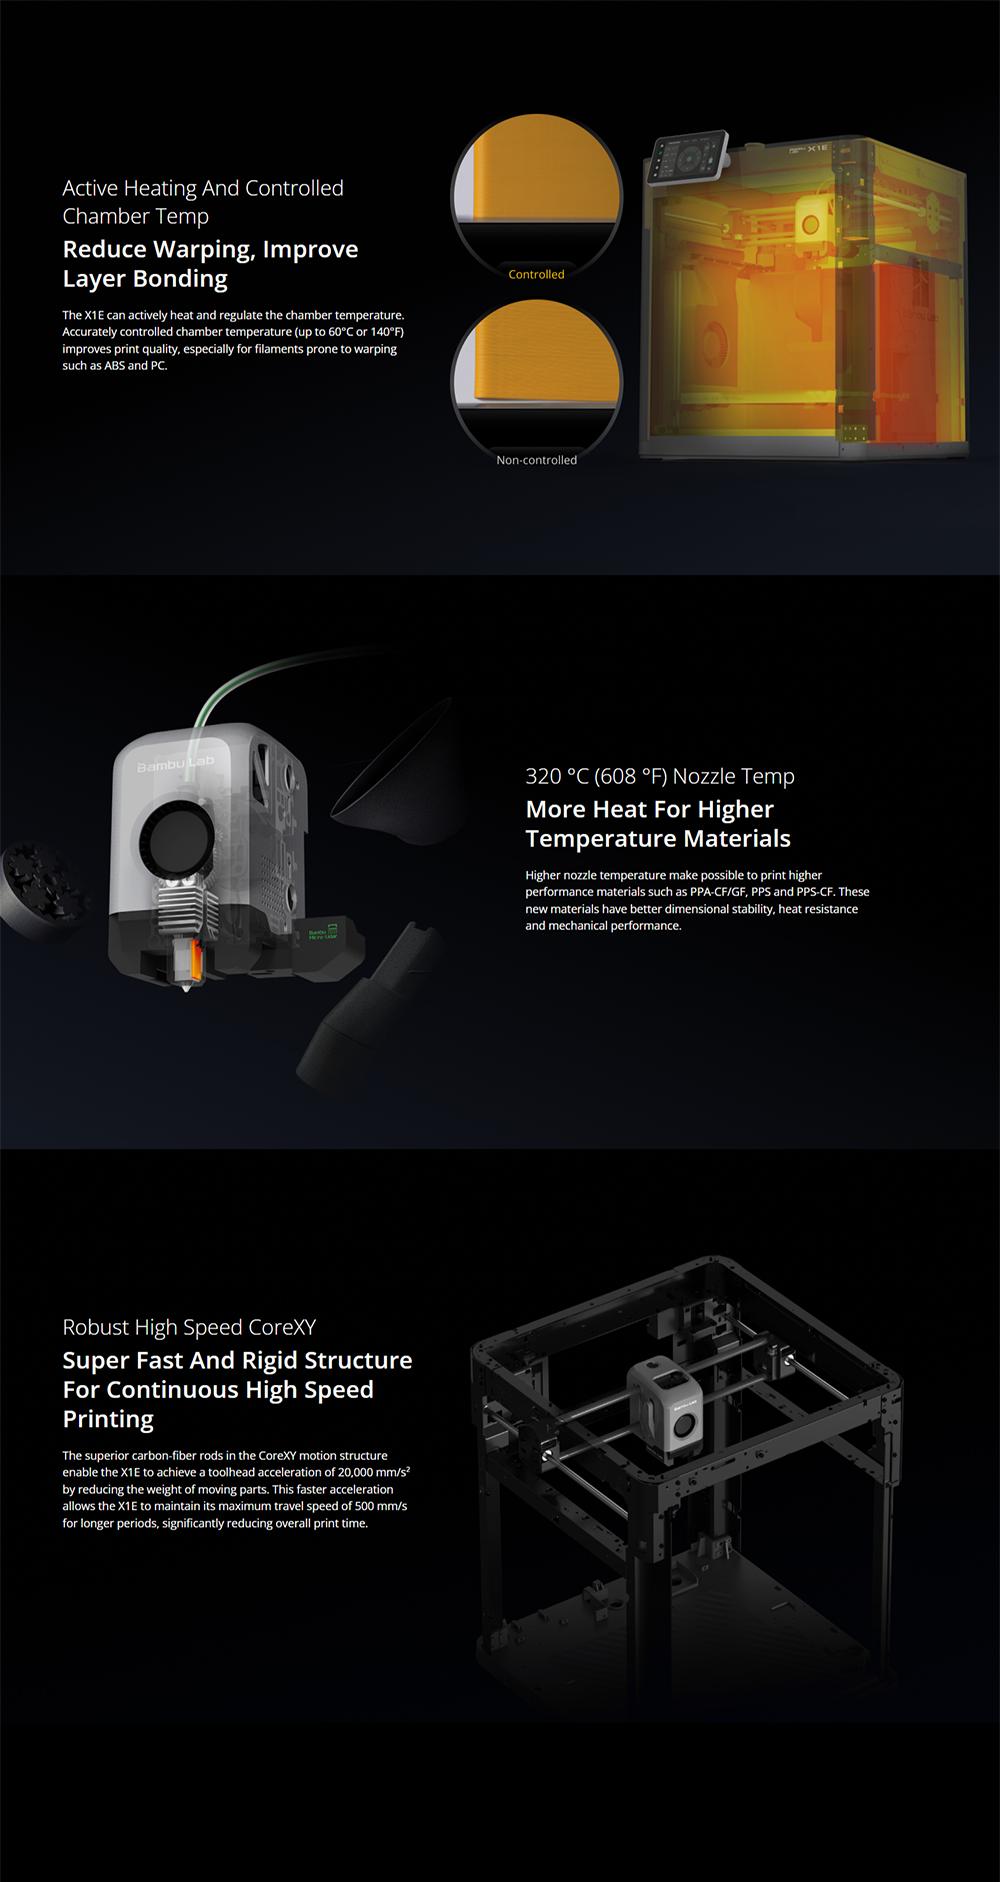 The image shows some of the features of the Bambu Lab X1E 3D printer, including active chamber heating, a high-temperature nozzle, and a robust high-speed CoreXY structure.